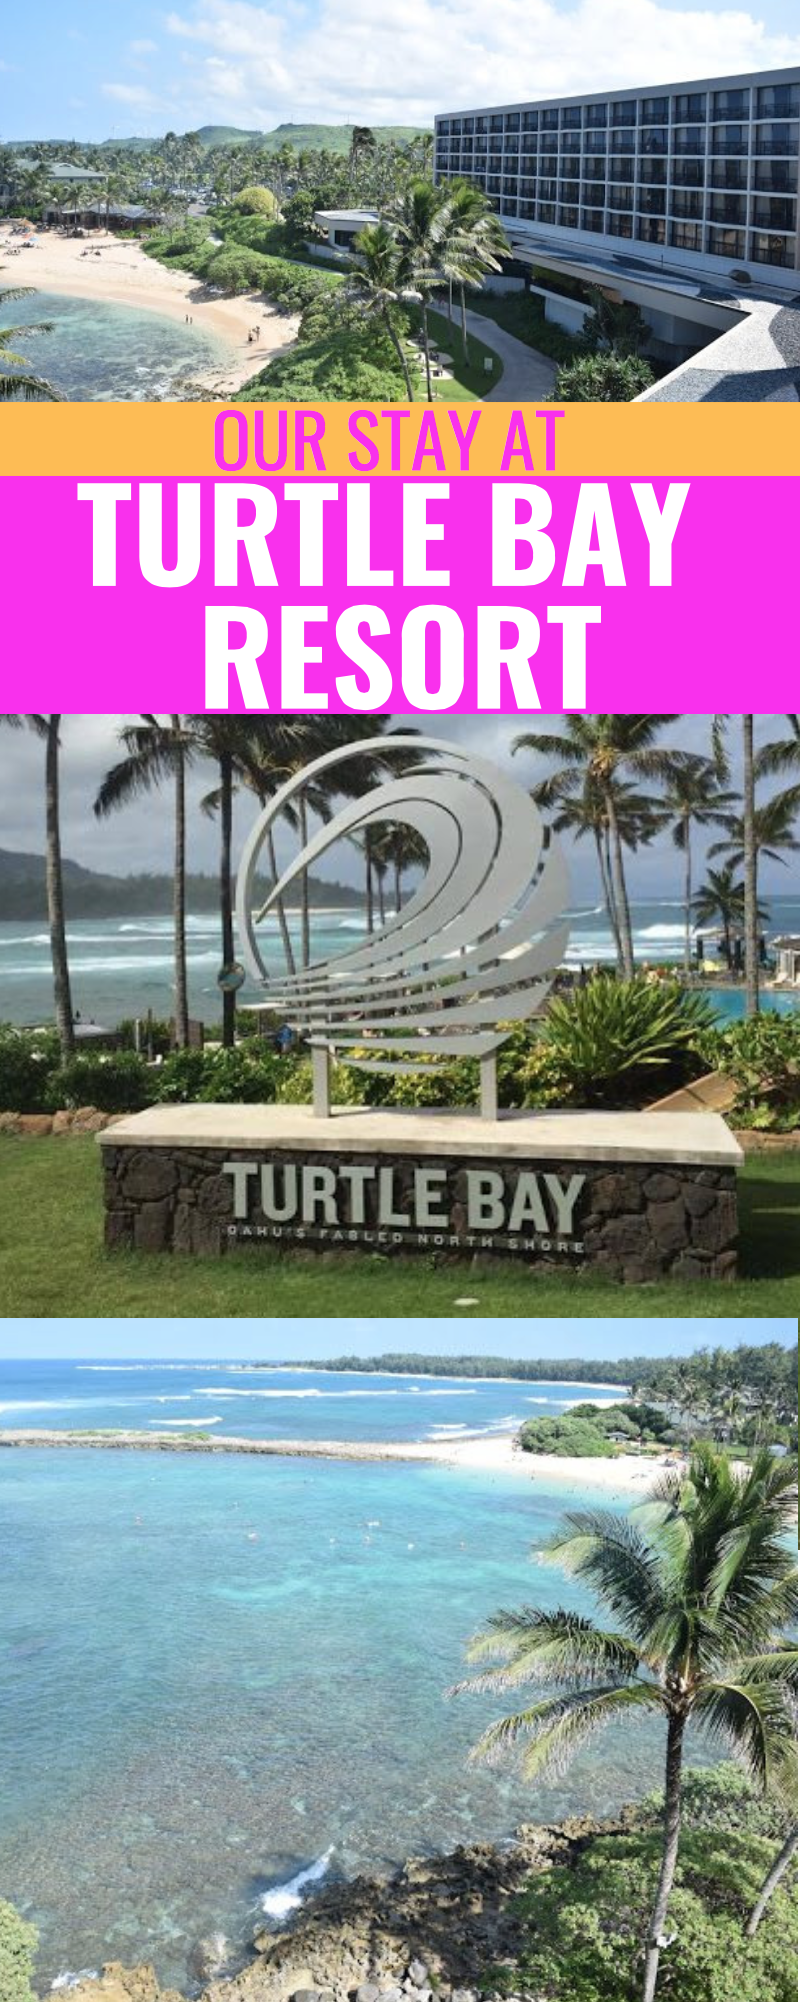 Our Stay At Turtle Bay Resort On Oahu - Turtle Resort Hawaii - The Turtle Bay Resort - Turtle Bay Resort Hawaii - Hawaii Hotels - Oahu Hotels - Turtle Bay On Oahu - North Shore Oahu Hotels - Communikait by Kait Hanson #oahu #hotels #hawaii #turtlebay